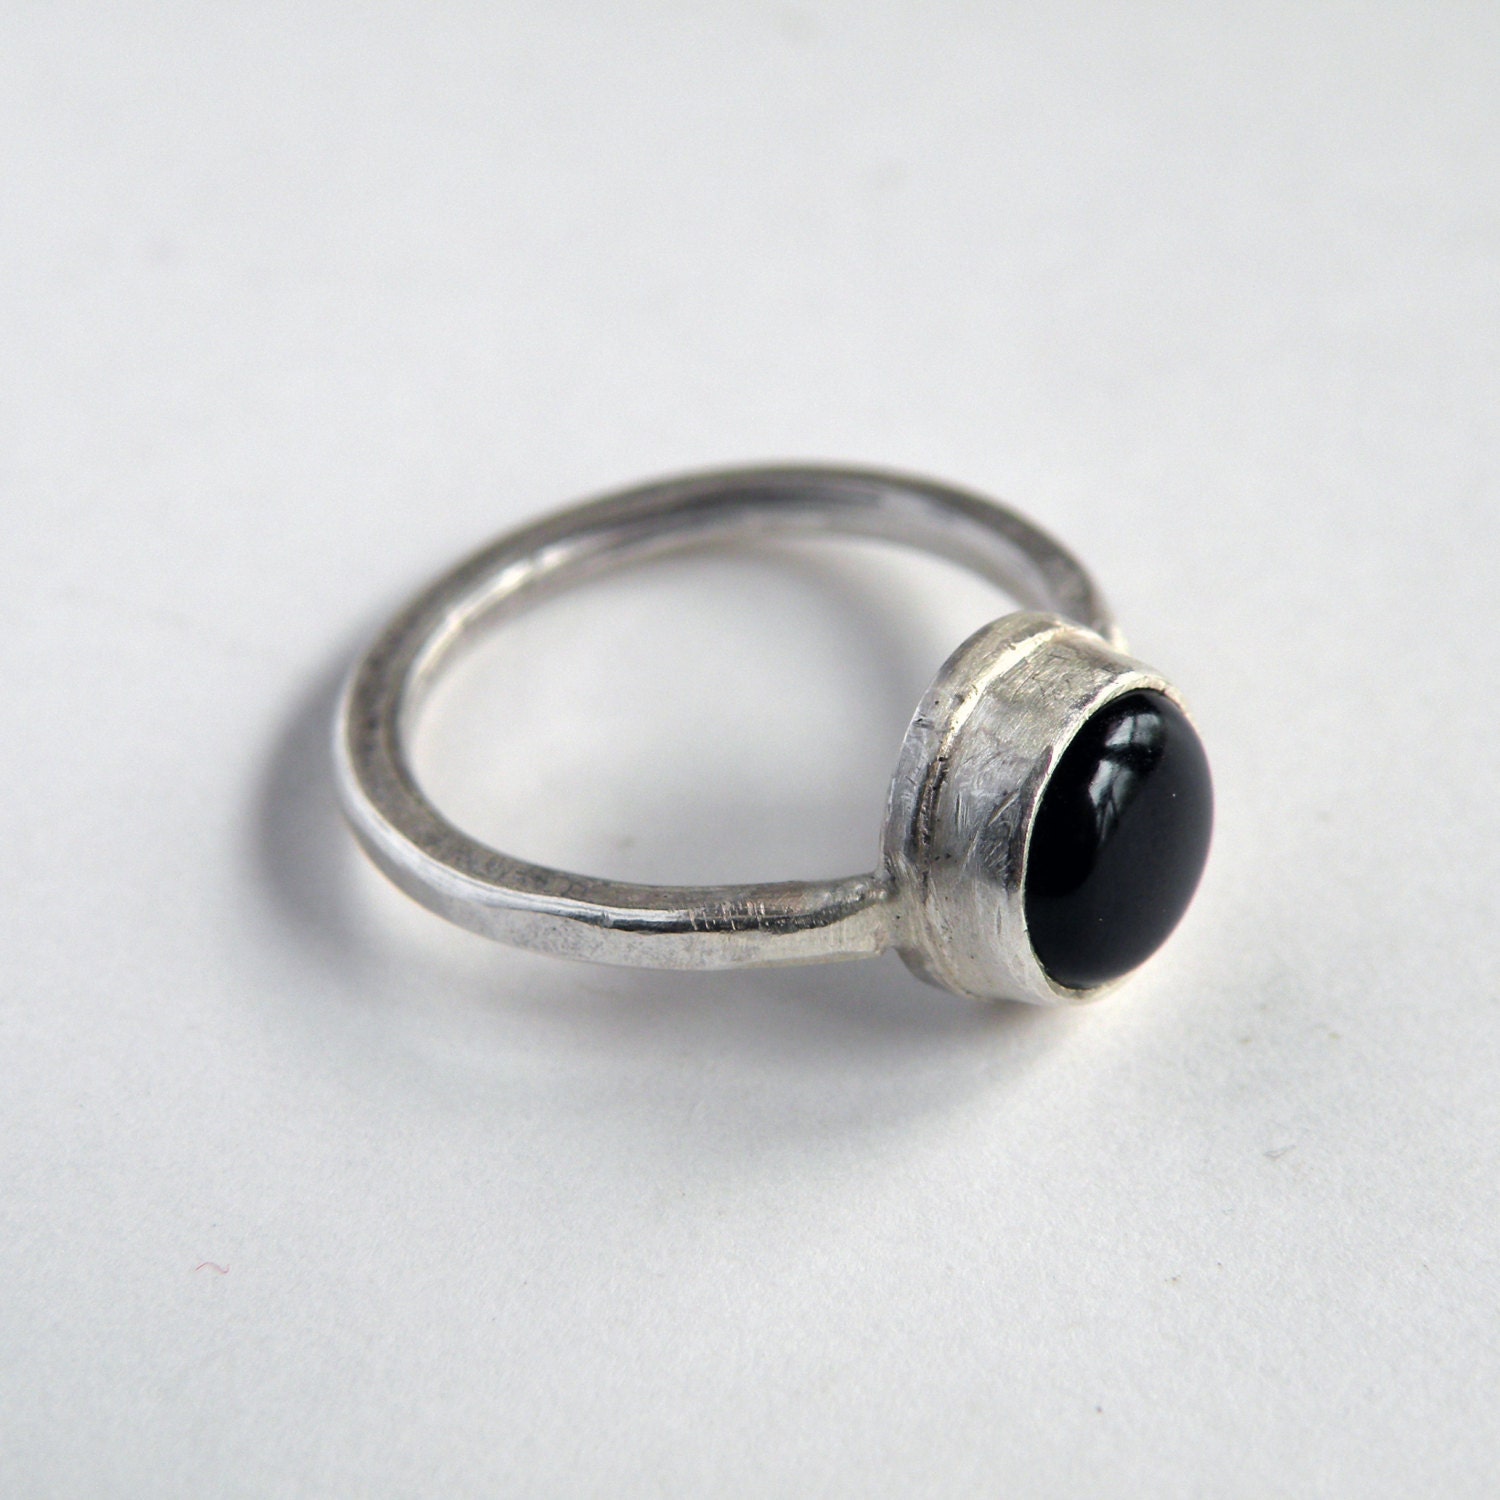 Black Onyx Ring in Sterling Silver